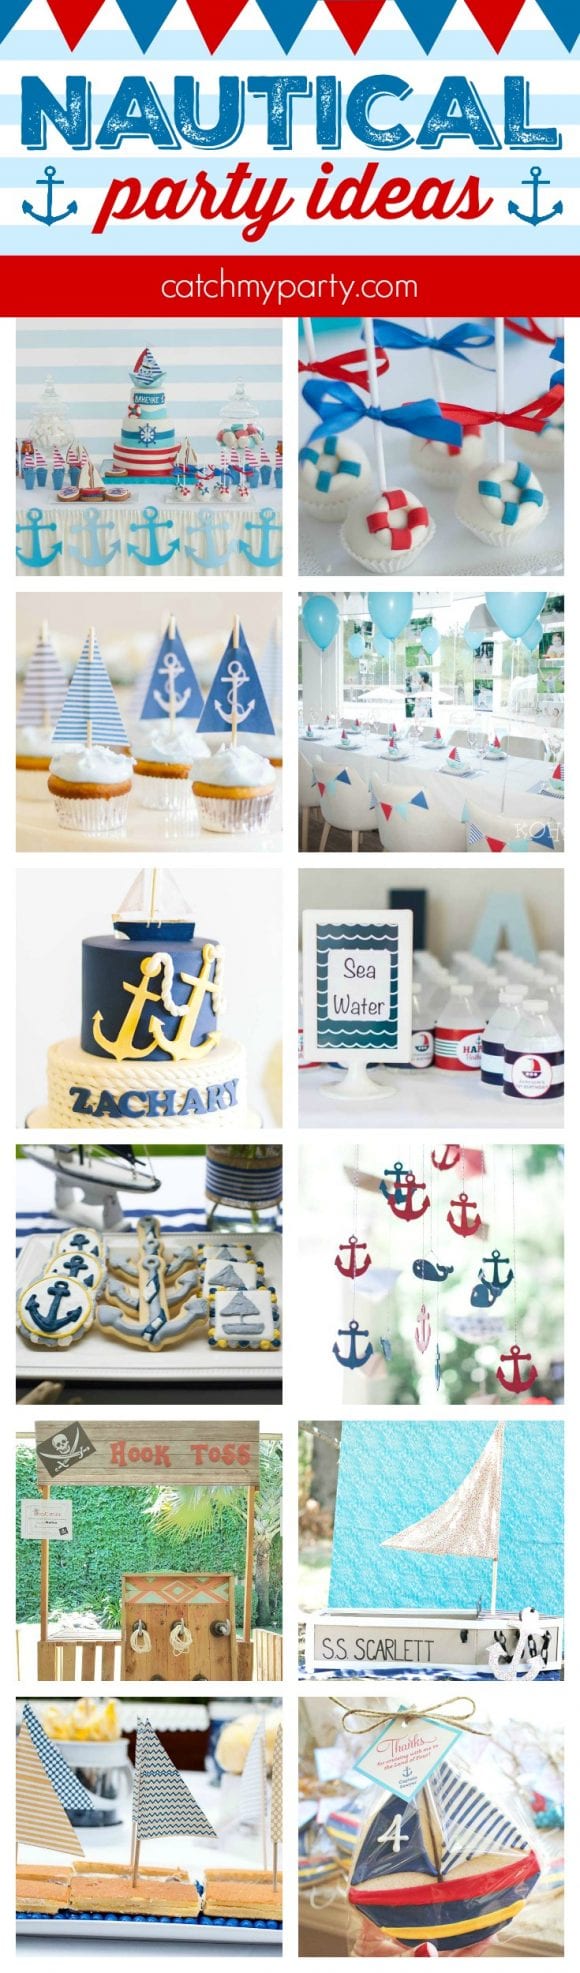 12 Must-See Nautical Party Ideas | CatchMyparty.com